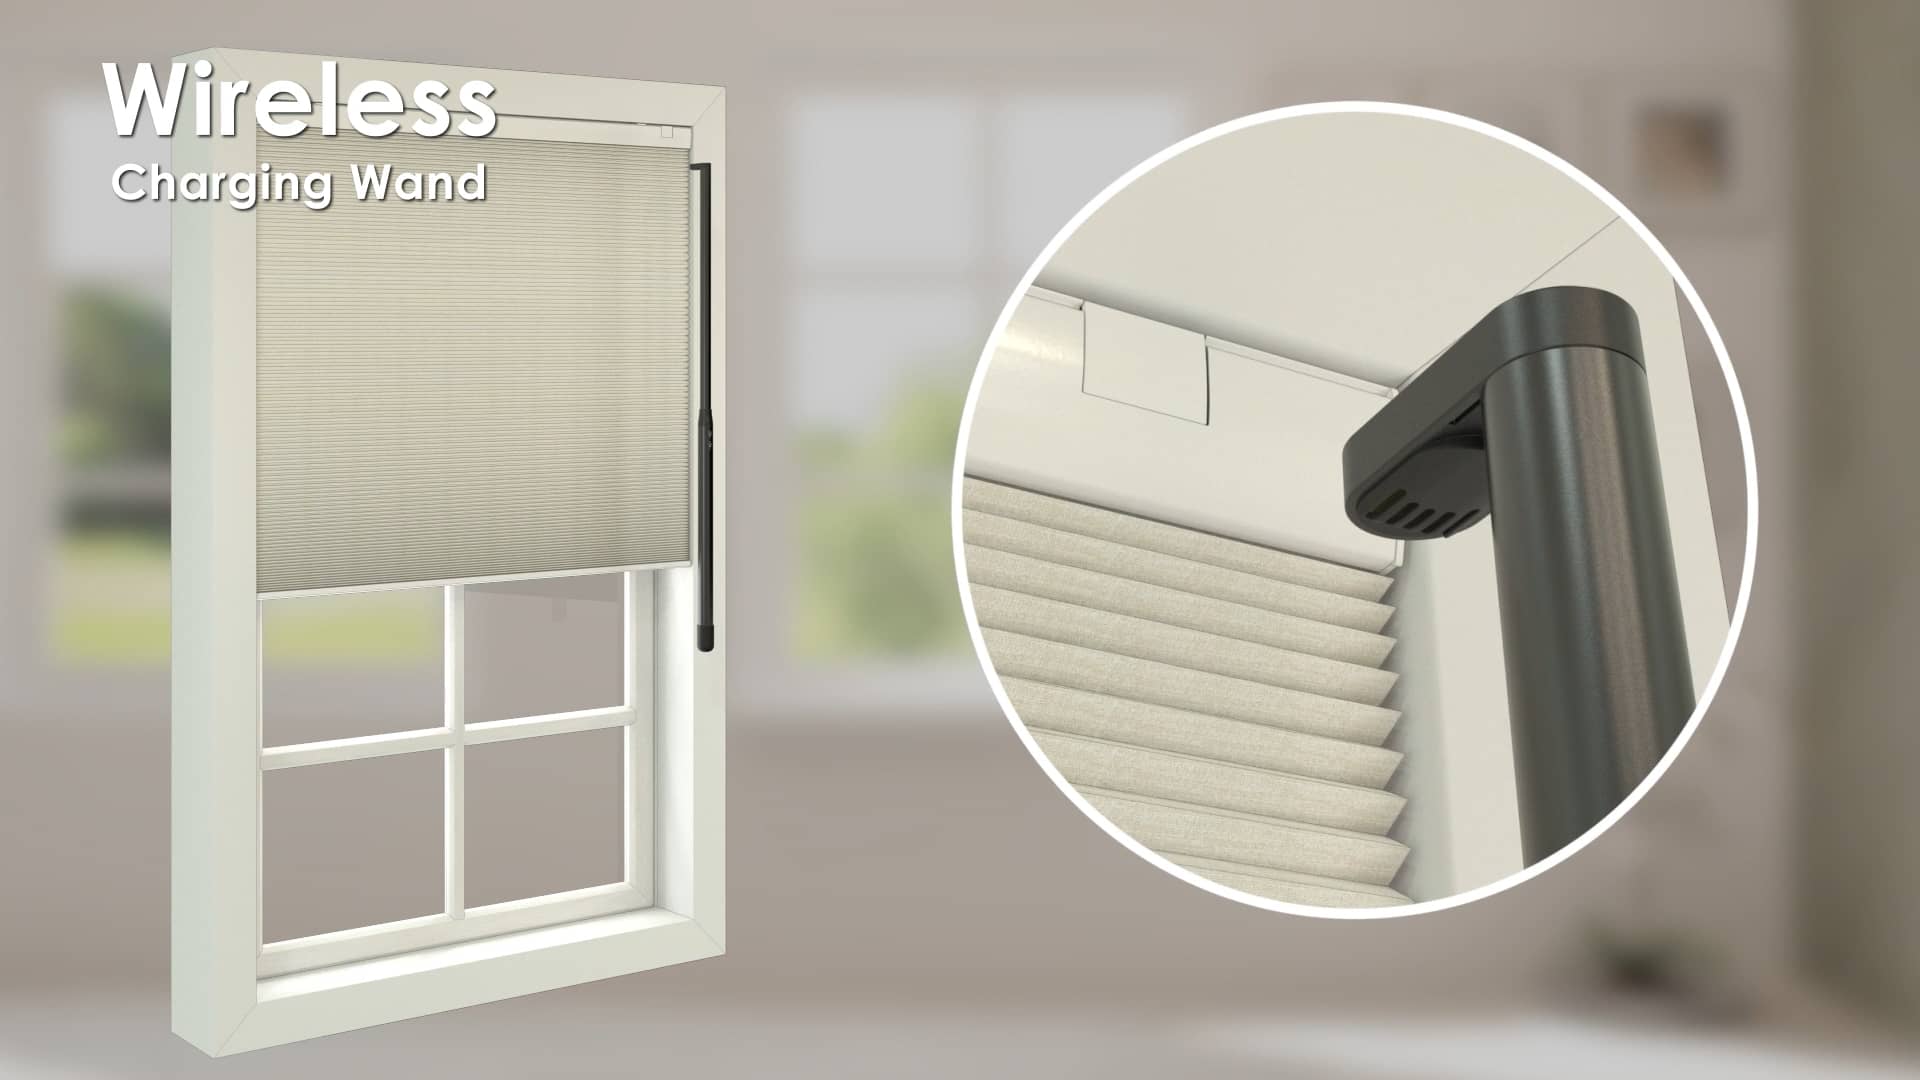 How to Charge Your Shade - Norman® Smart Motorized Shade on Vimeo